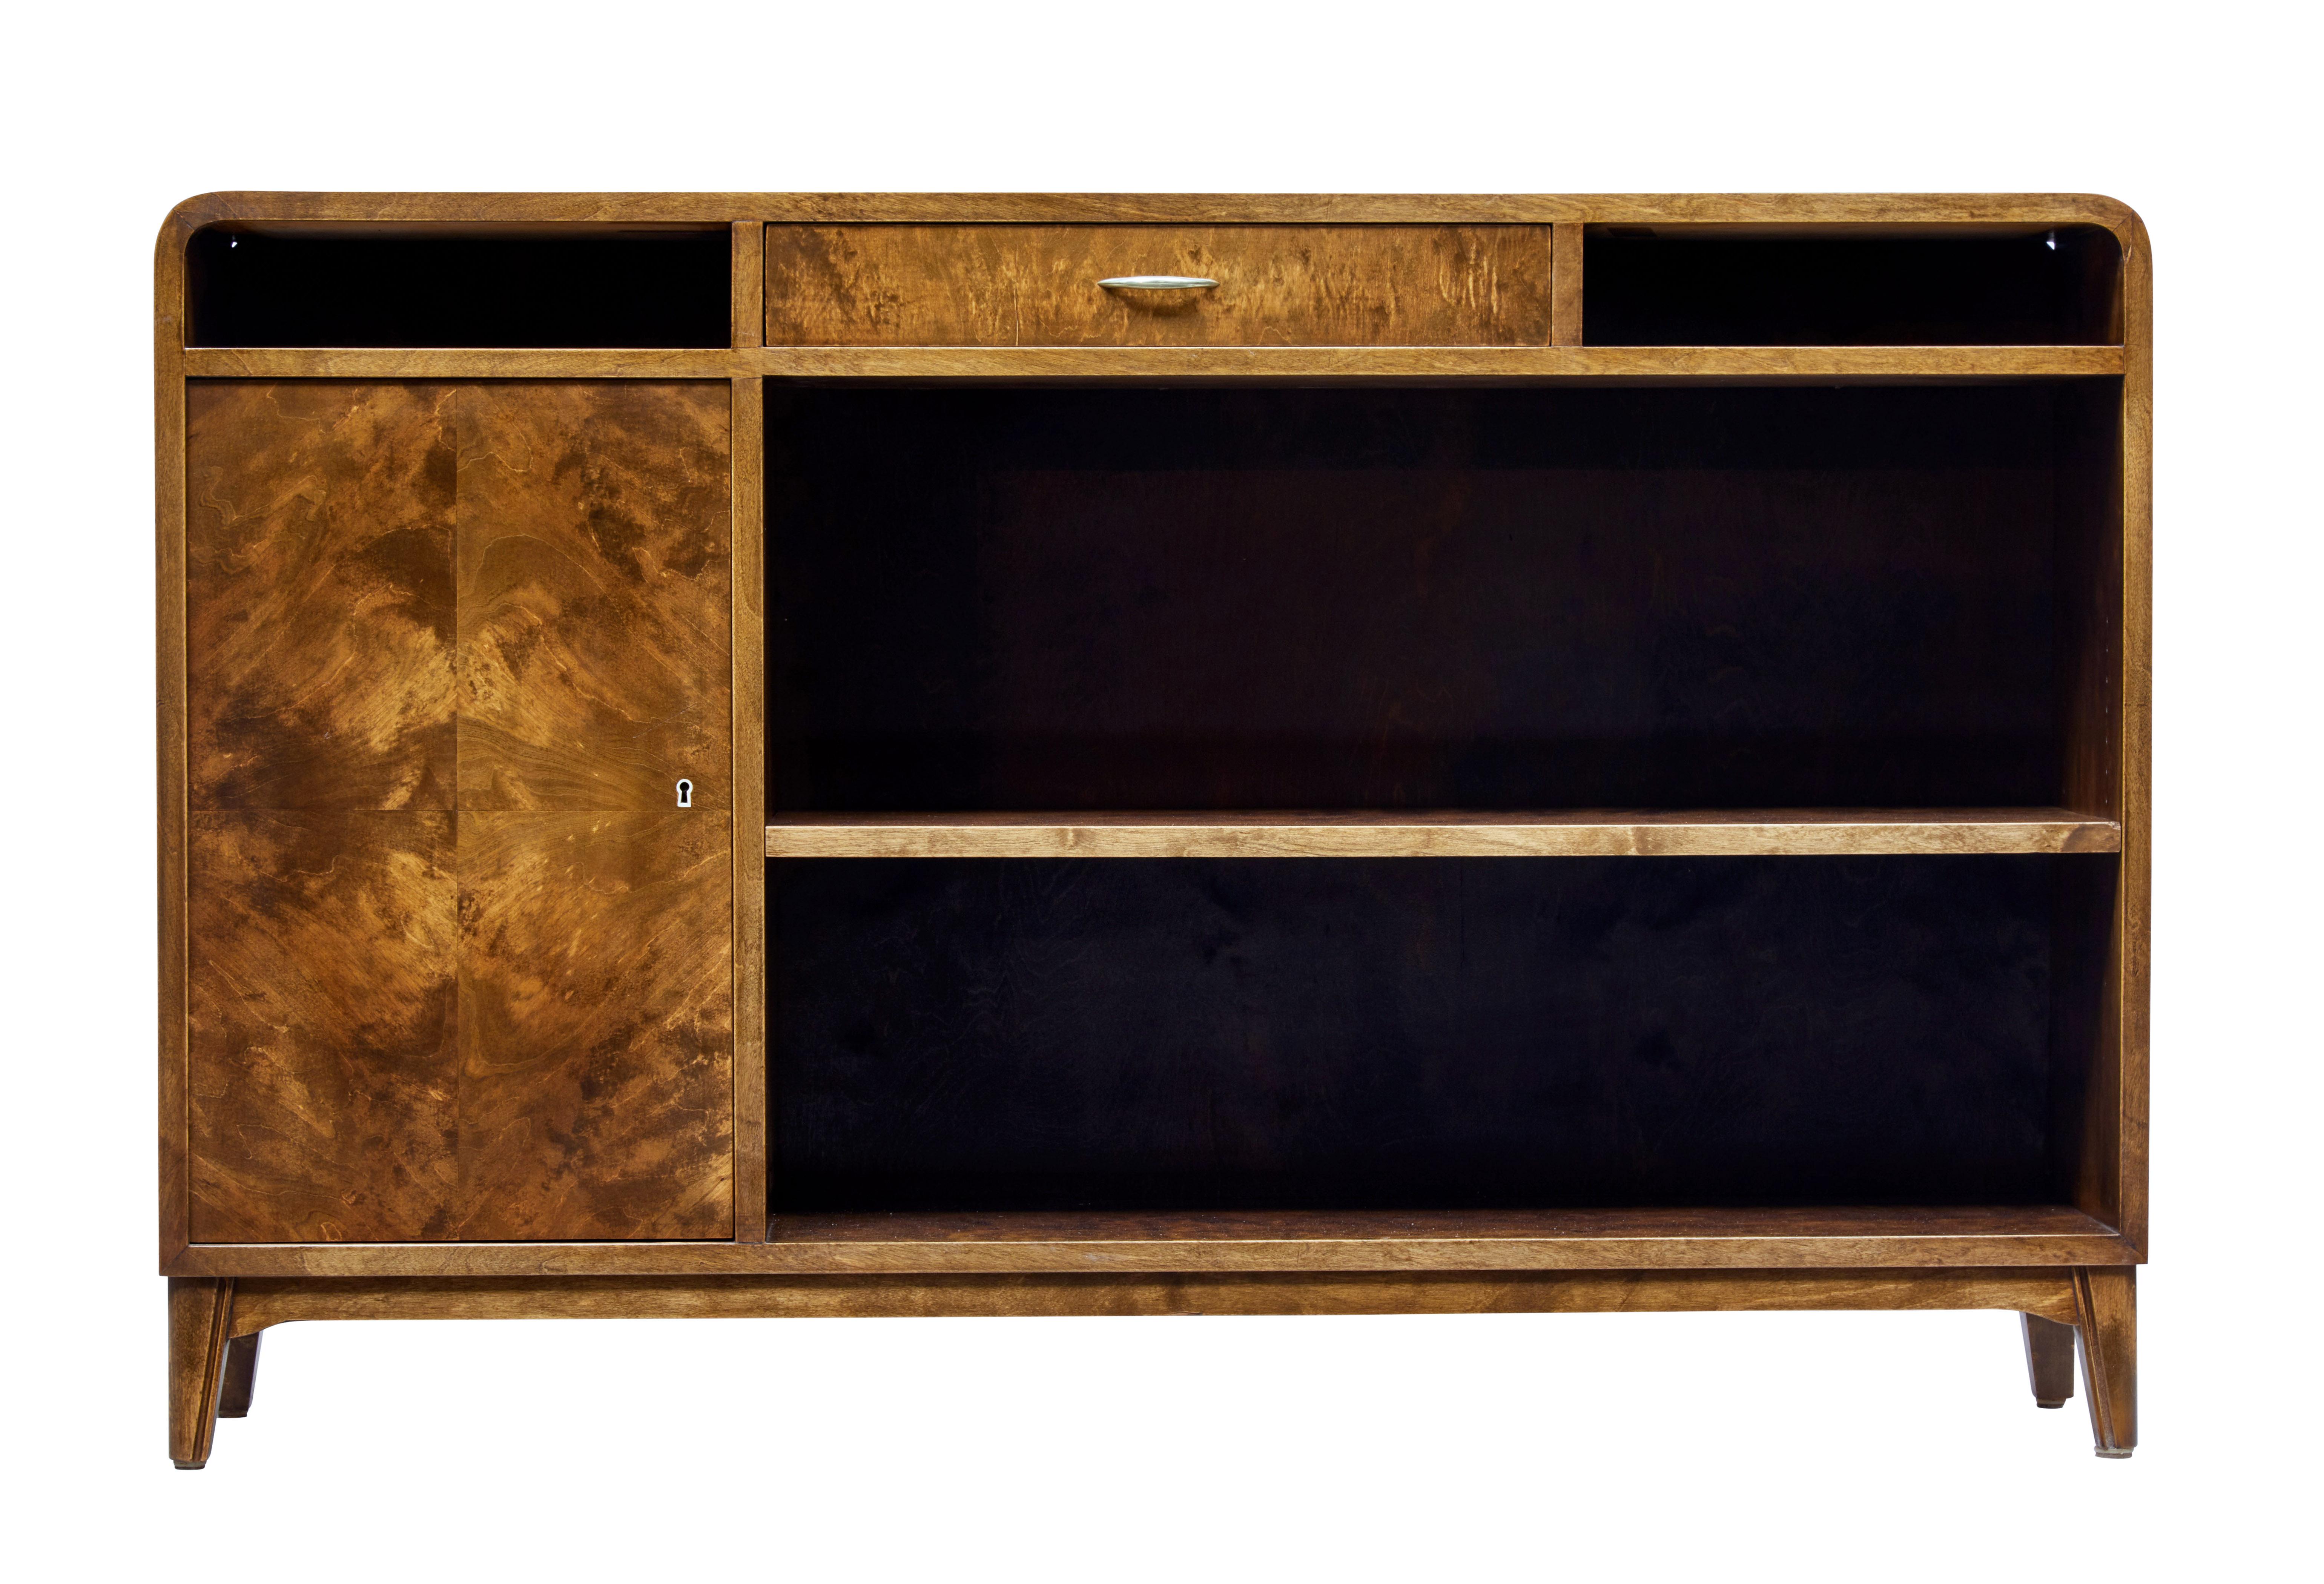 Scandinavian Modern dark stained bookcase, circa 1950.

Low bookcase with strong Art Deco influences. Rounded corners with central drawer, flanked either side by and open aperture. Single door cupboard to the left, with quarter veneer pattern to